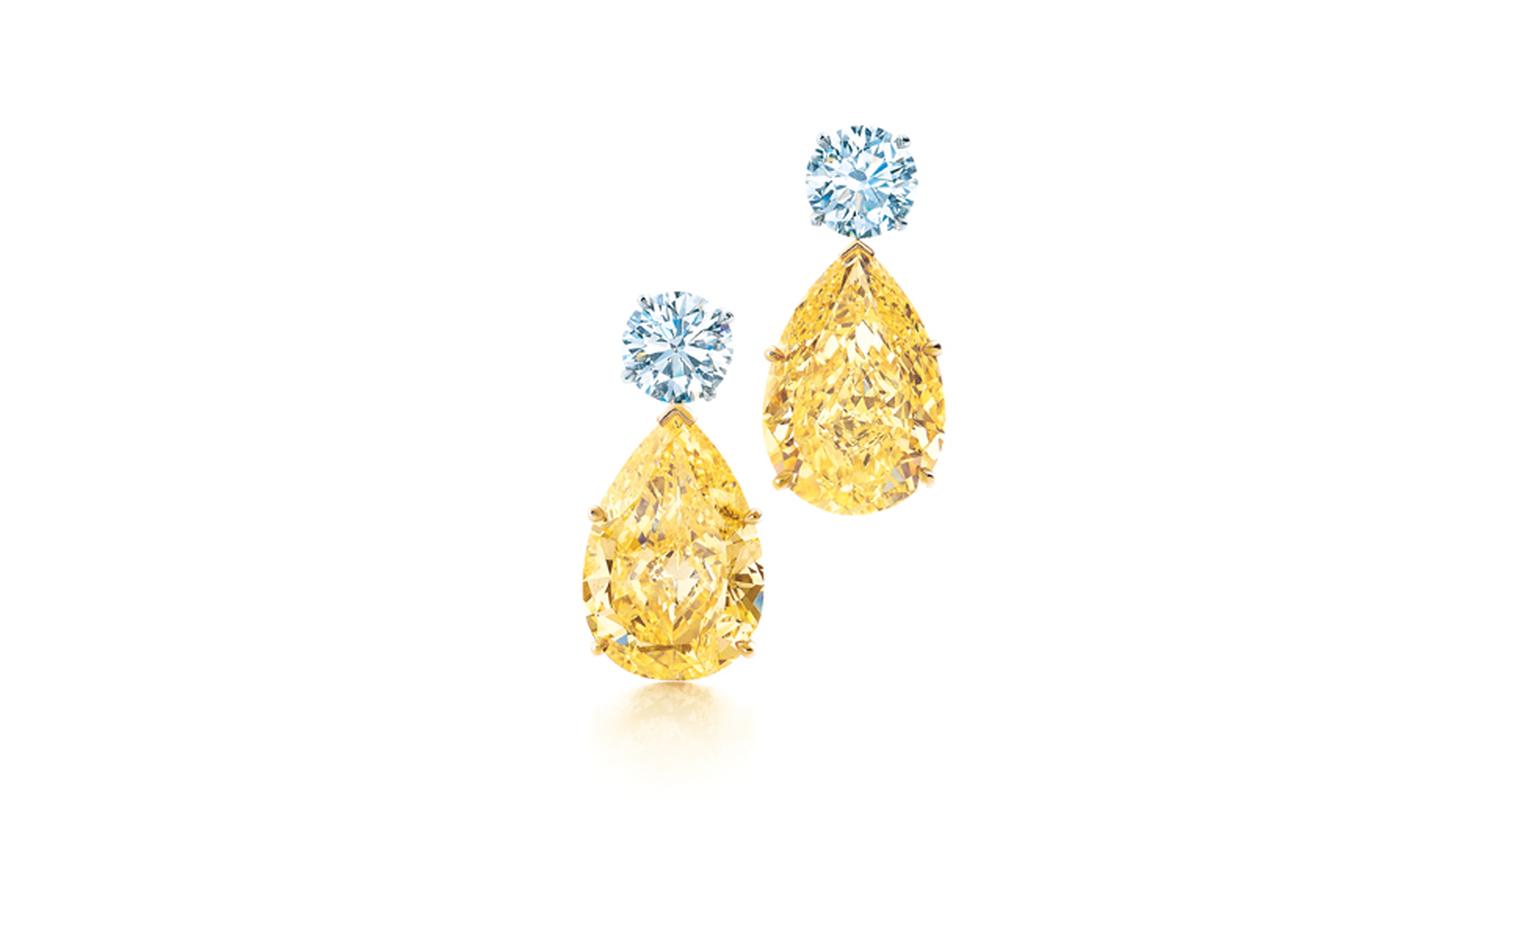 Tiffany & Co yellow and white diamond earrings in platinum £1,517,500